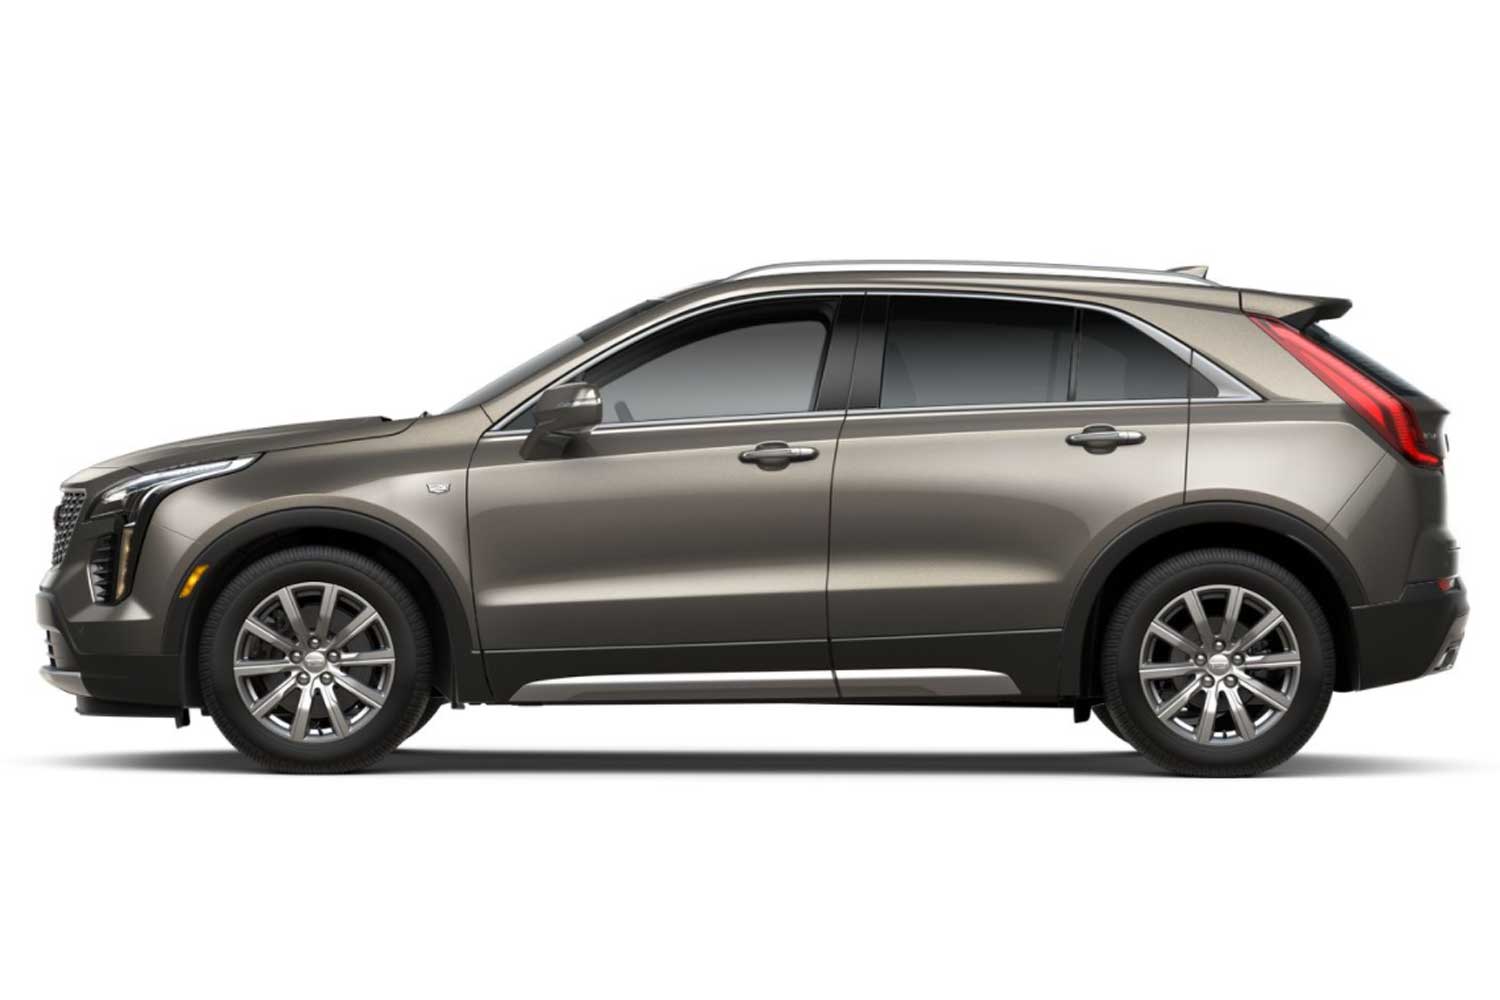 2022 Cadillac XT4 Here's The New Latte Metallic Exterior Color